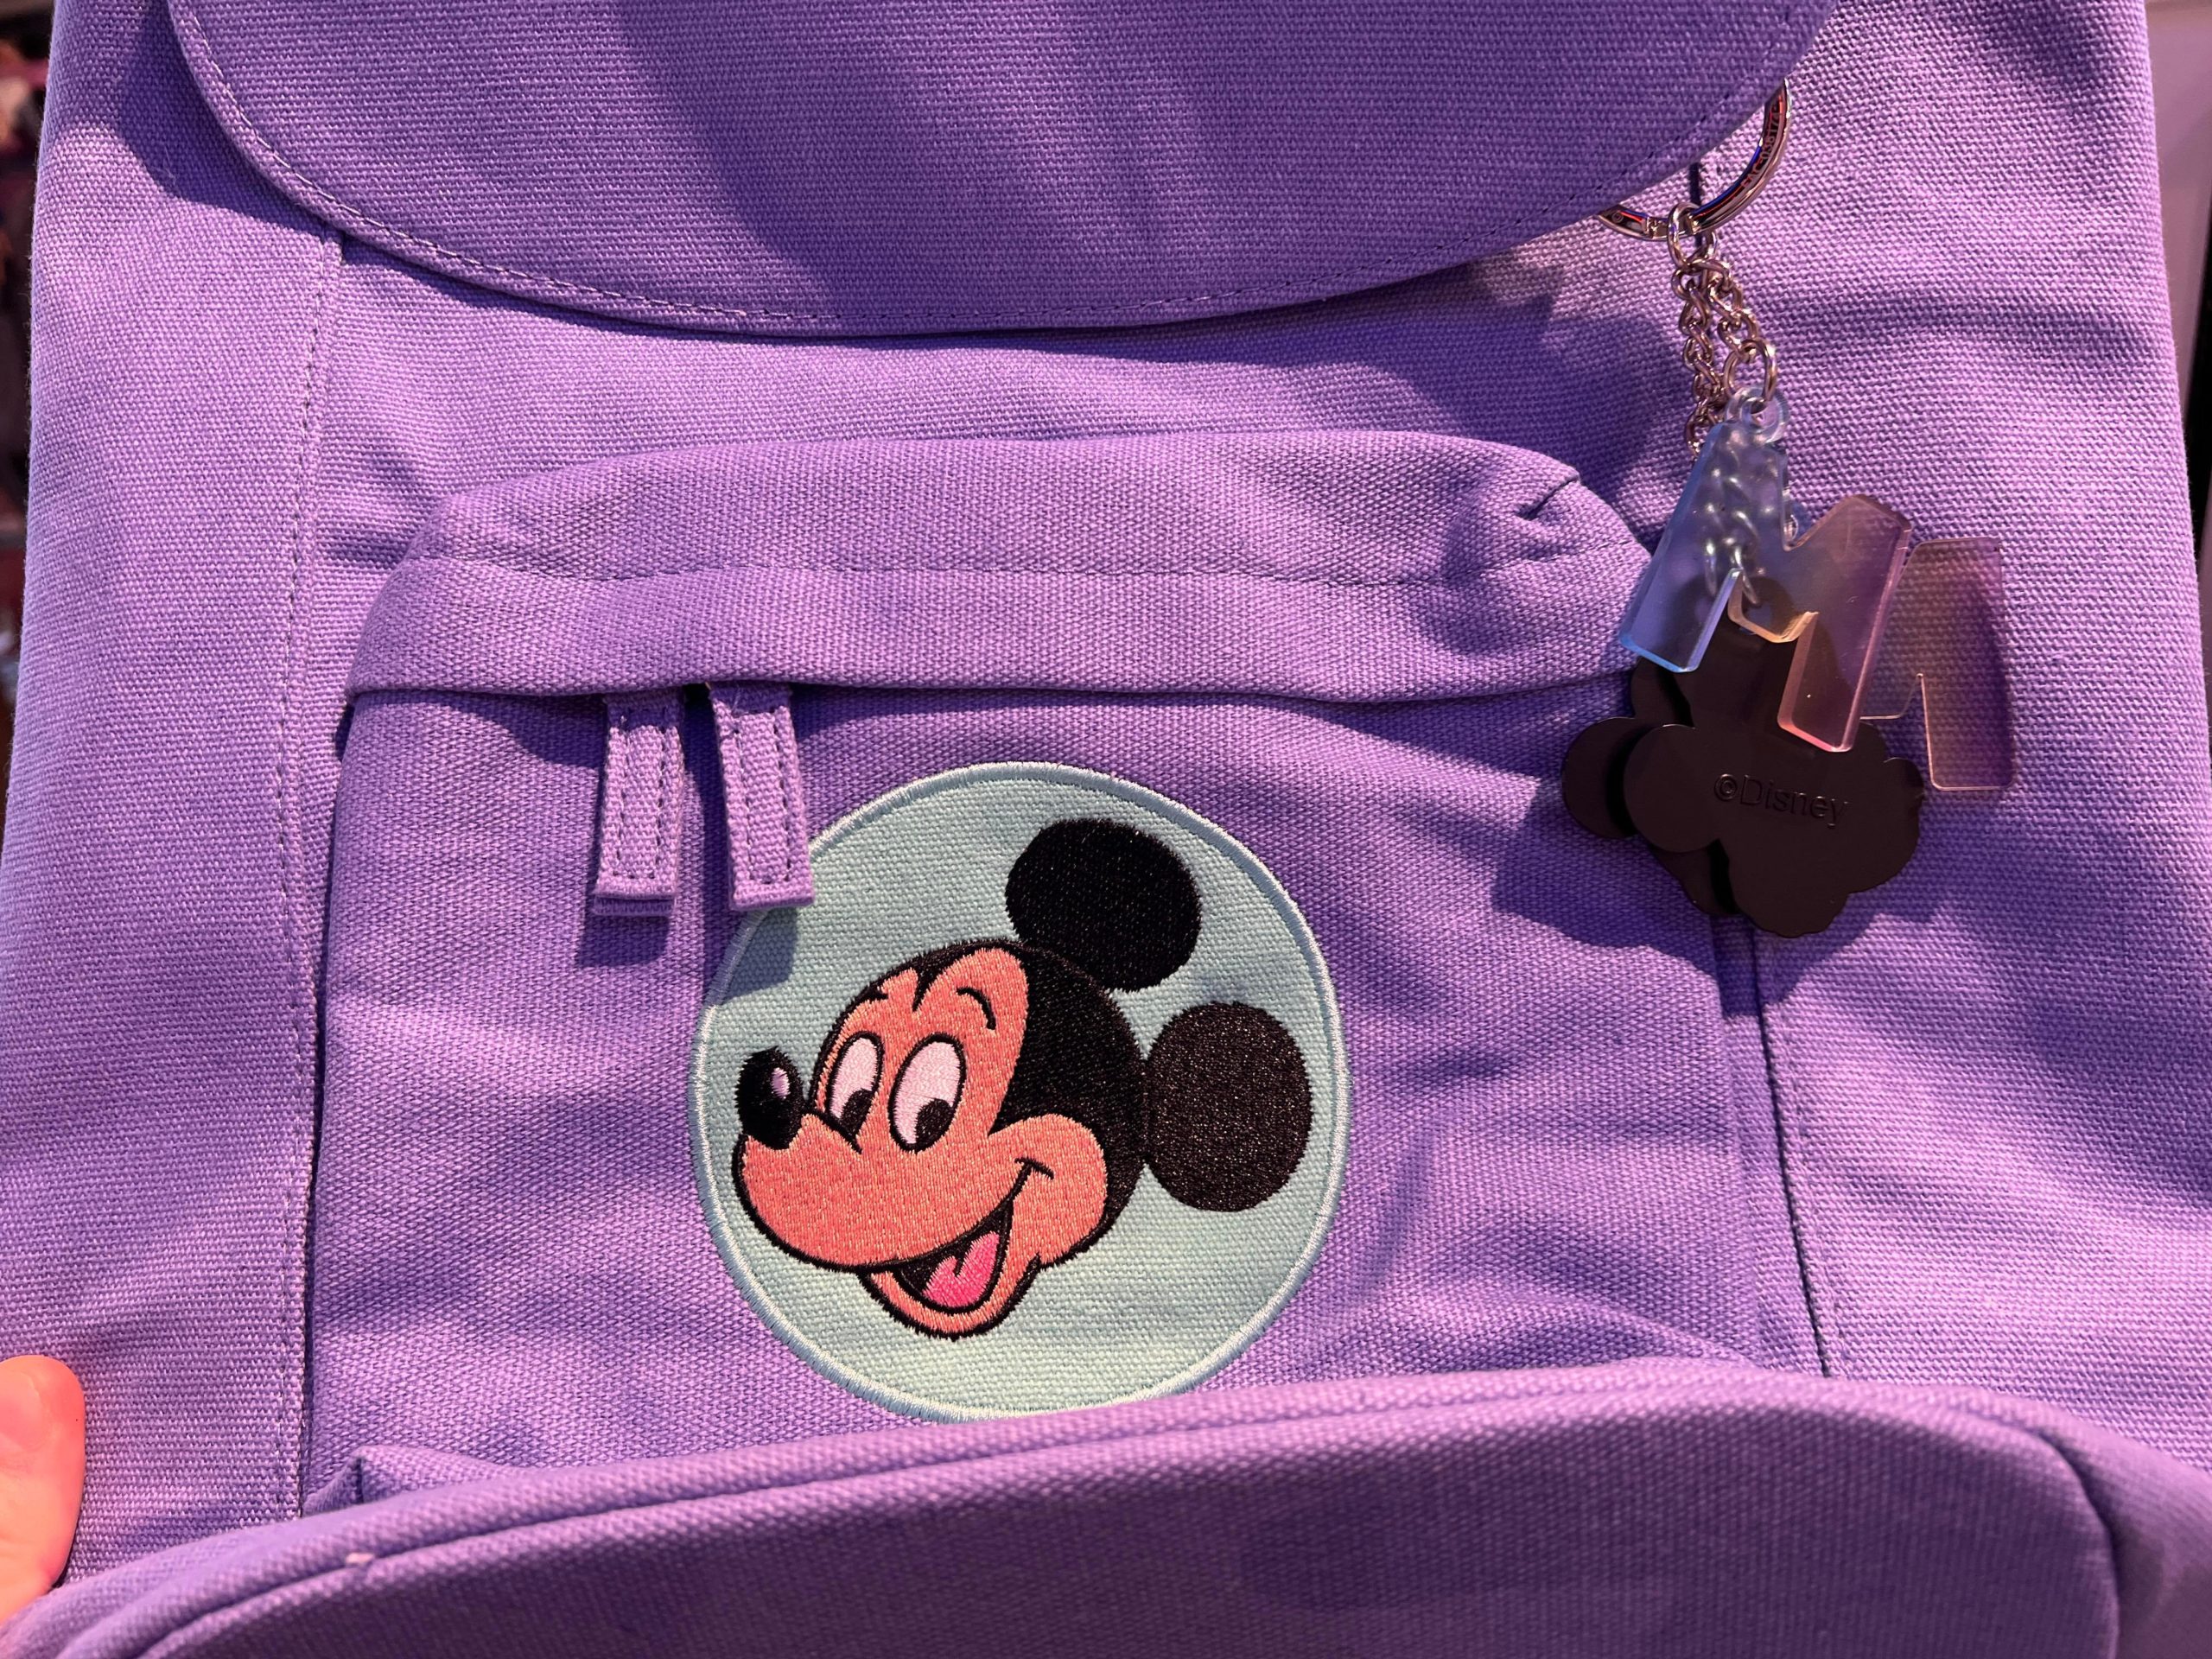 Mickey Teal Hat and Purple Backpack